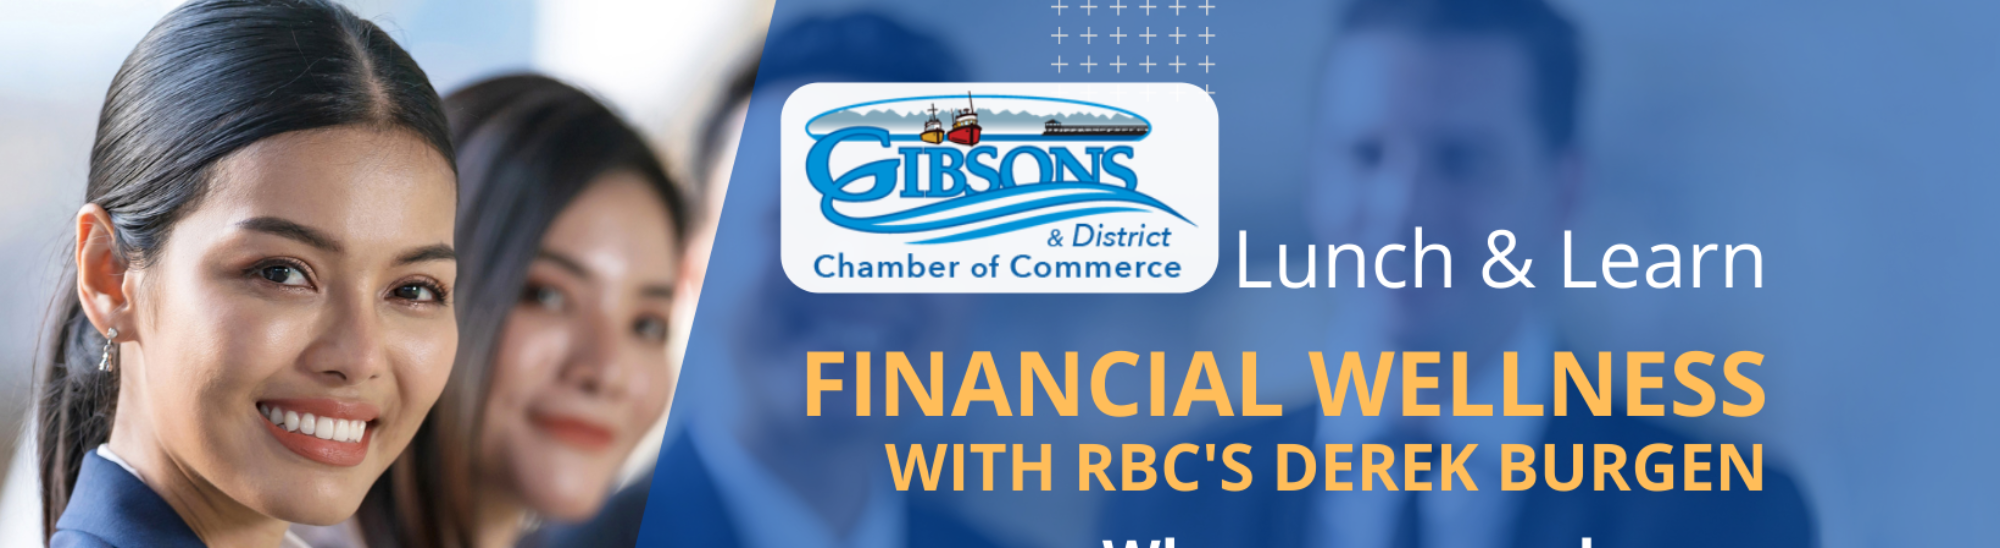 Event: Lunch & Learn Financial Wellness for Businesses